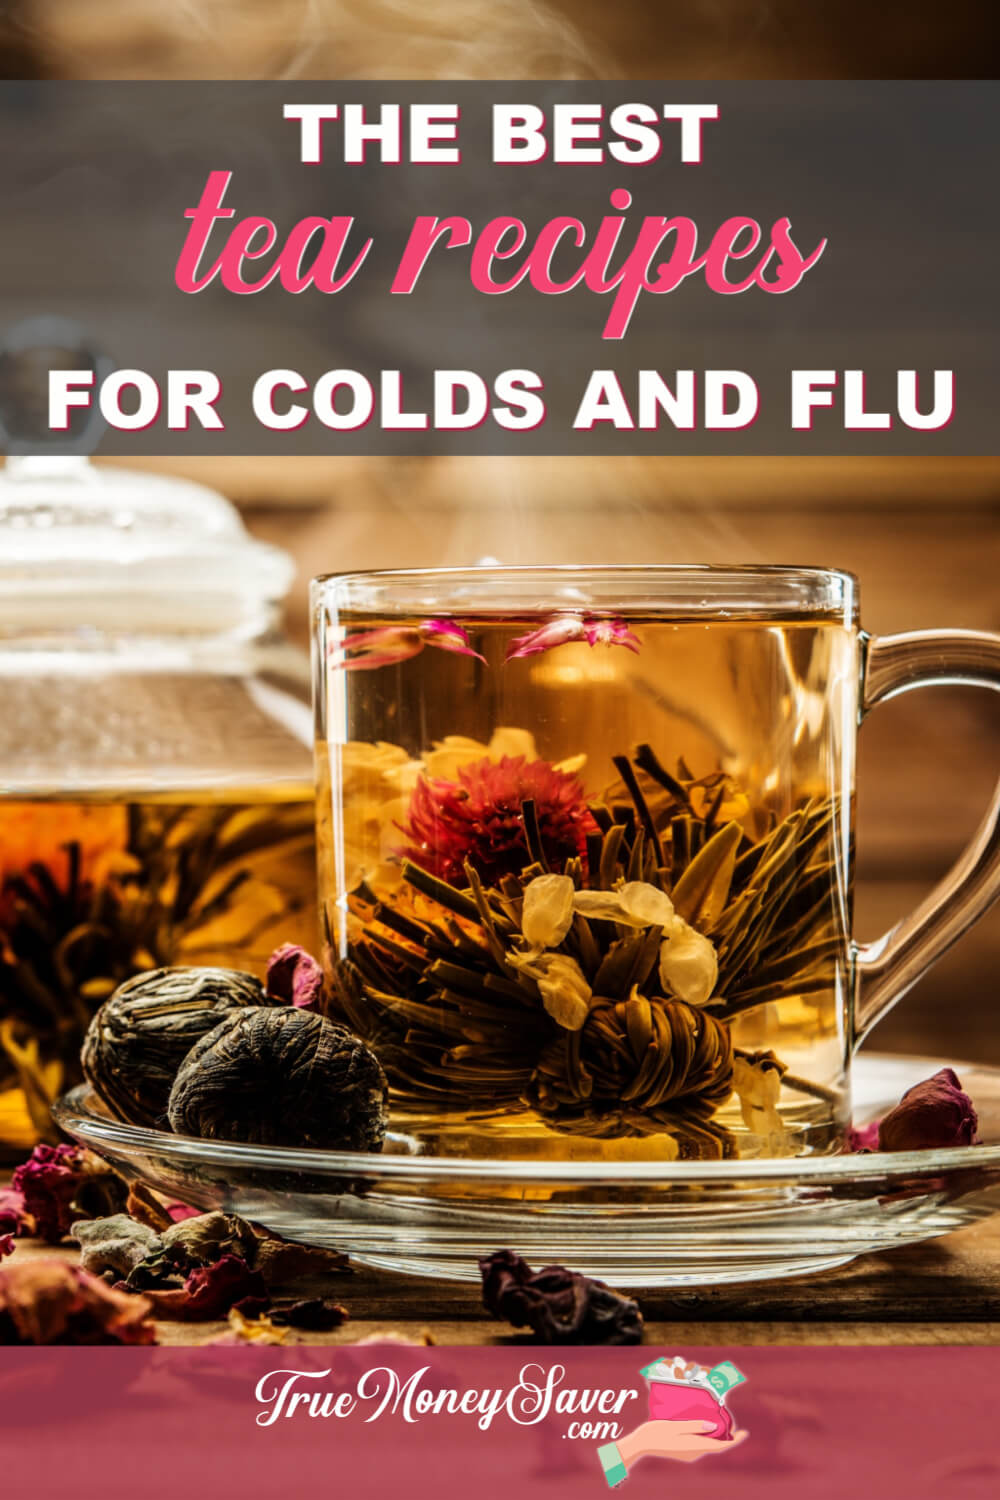 The Best Tea Recipes For Colds And The Flu